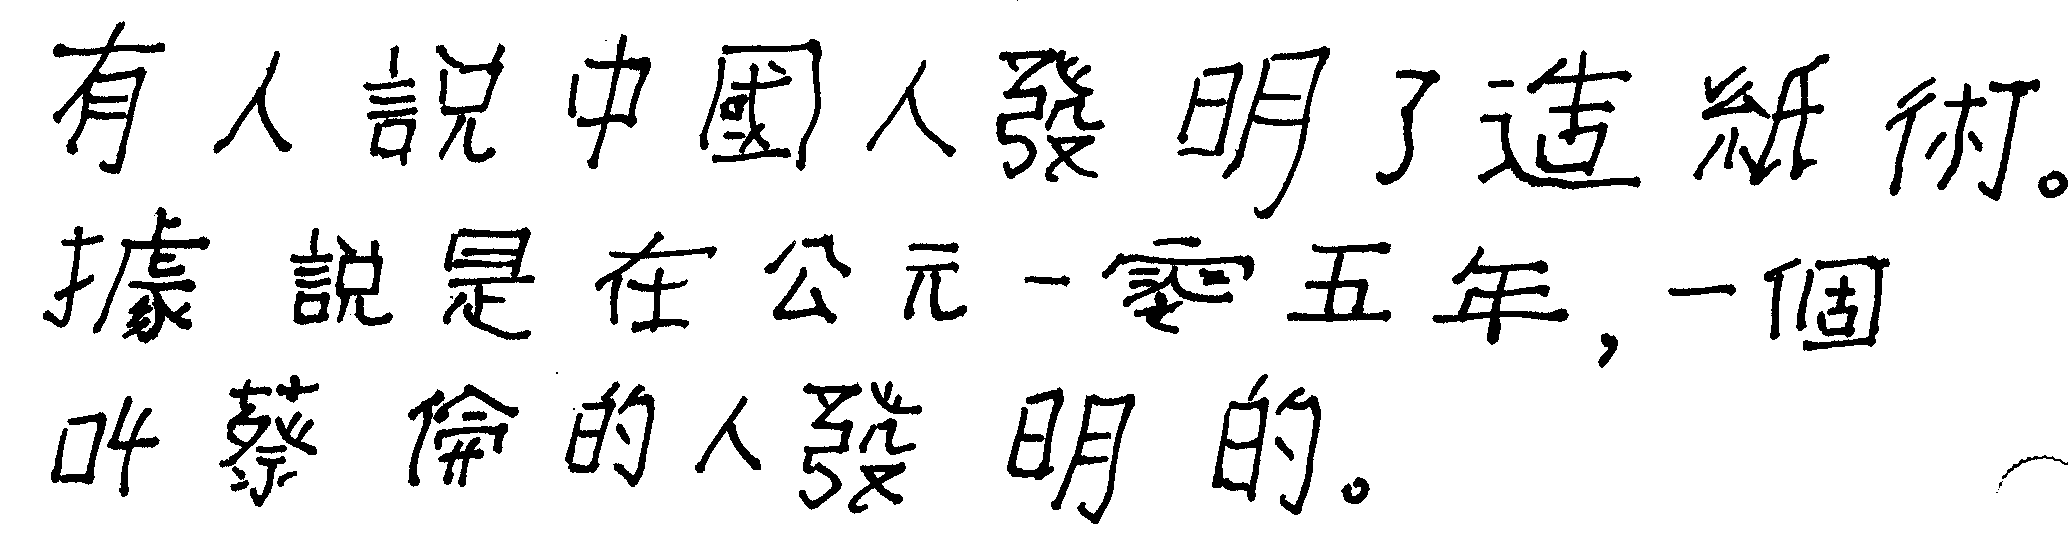 My absolute favorite thing ever, is when a sales rep or waitress is trying to tell us something in Mandarin and we tell them they don't understand.  Then they pull out a notepad and start writing it out in Chinese, thinking that maybe we'll understand THAT!  It happens all the time...I'm unclear on the logic...